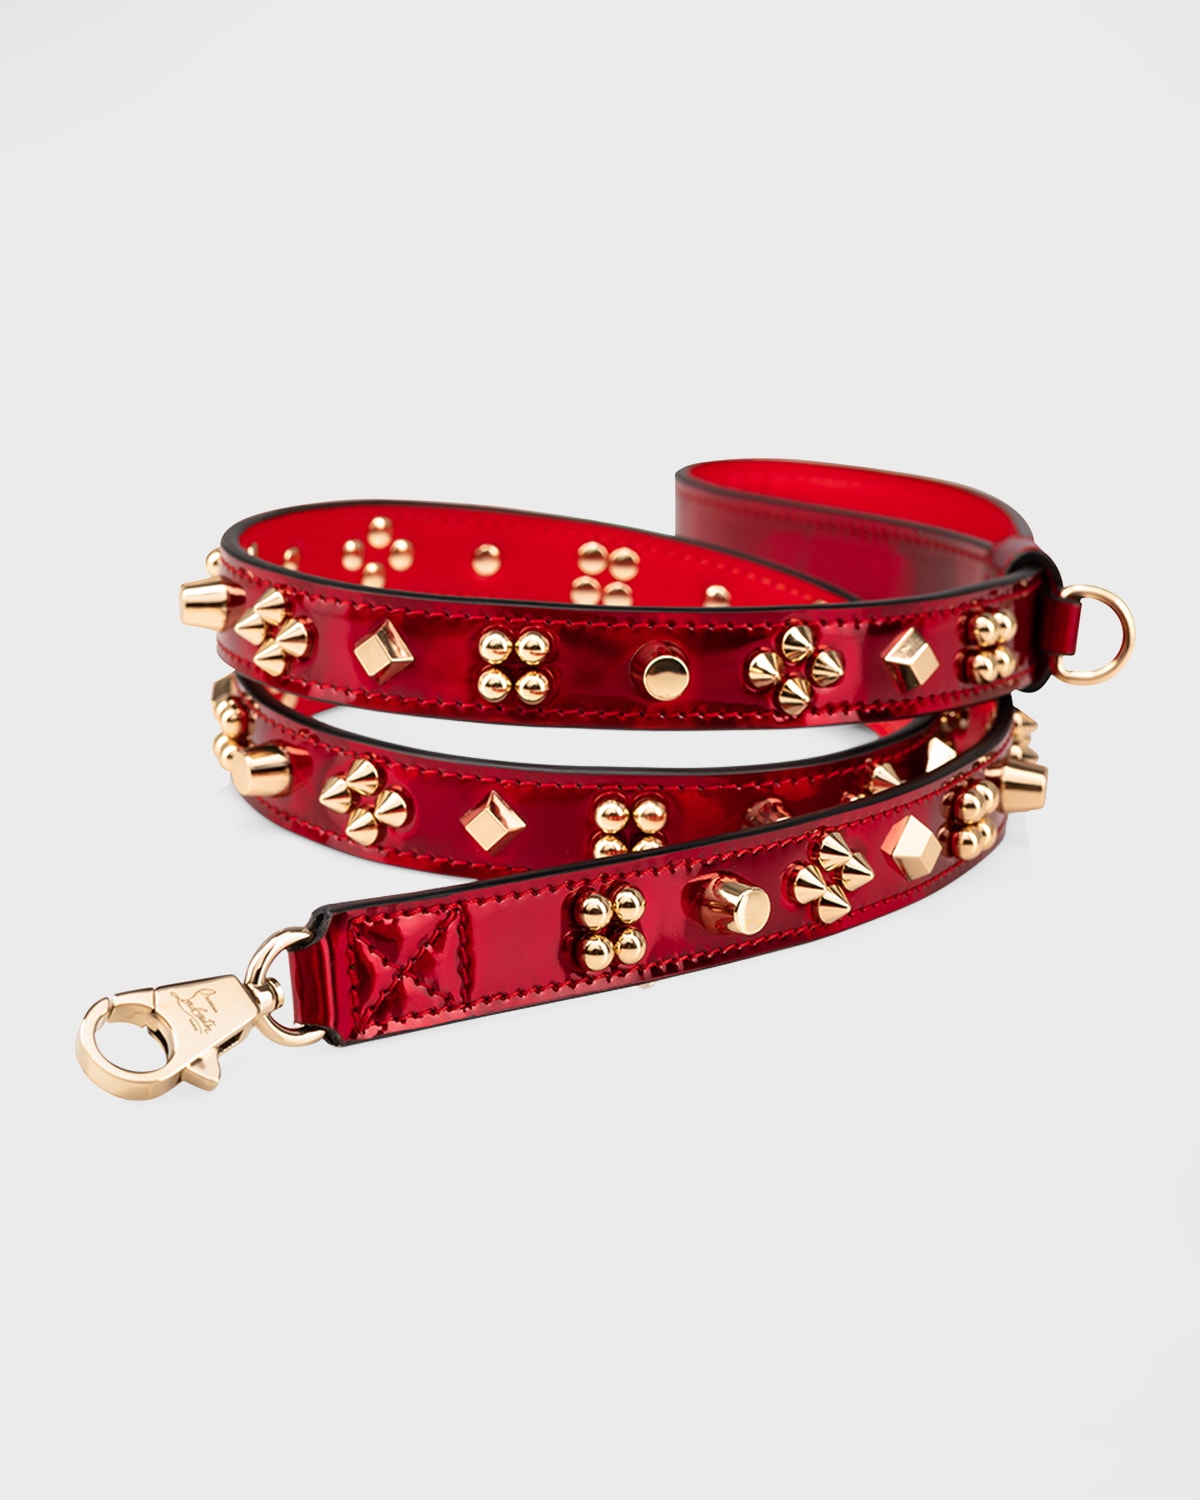 Christian Louboutin Loubileash Psychic Patent Leather Dog Leash With Cara Spikes, Medium In Red